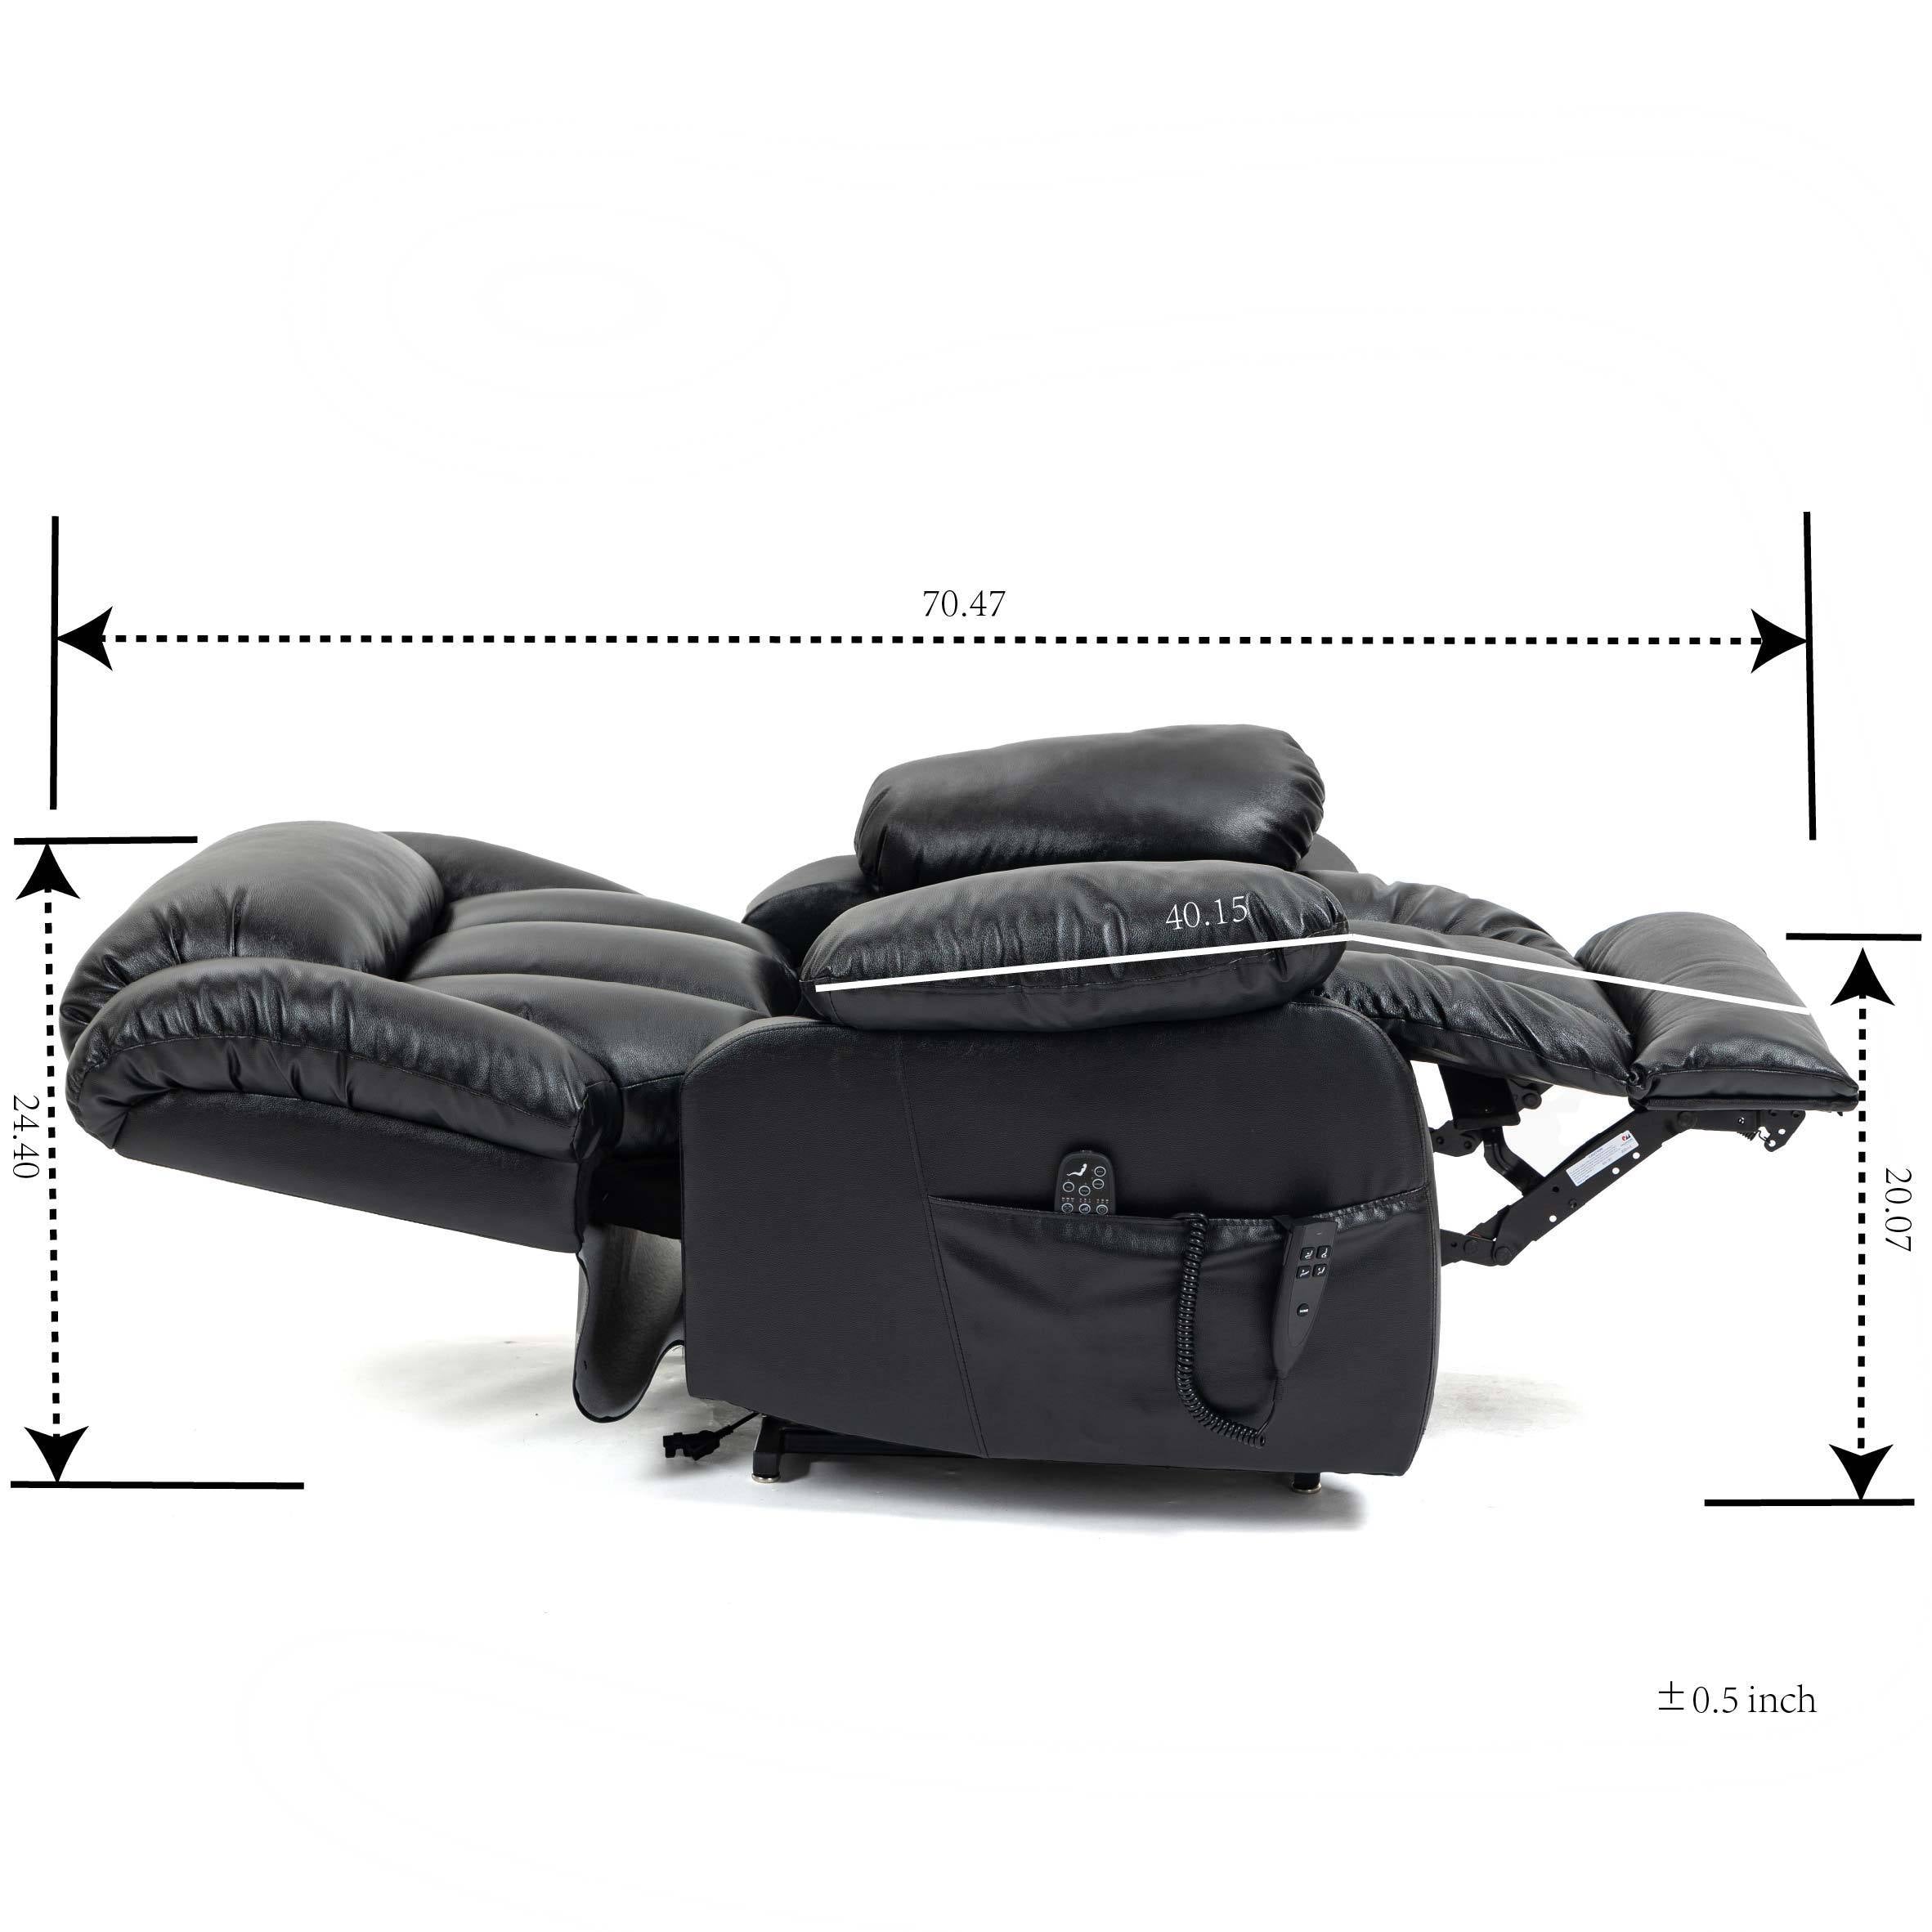 Black Leather Power Lift Recliner Chair, sleep position with measurements